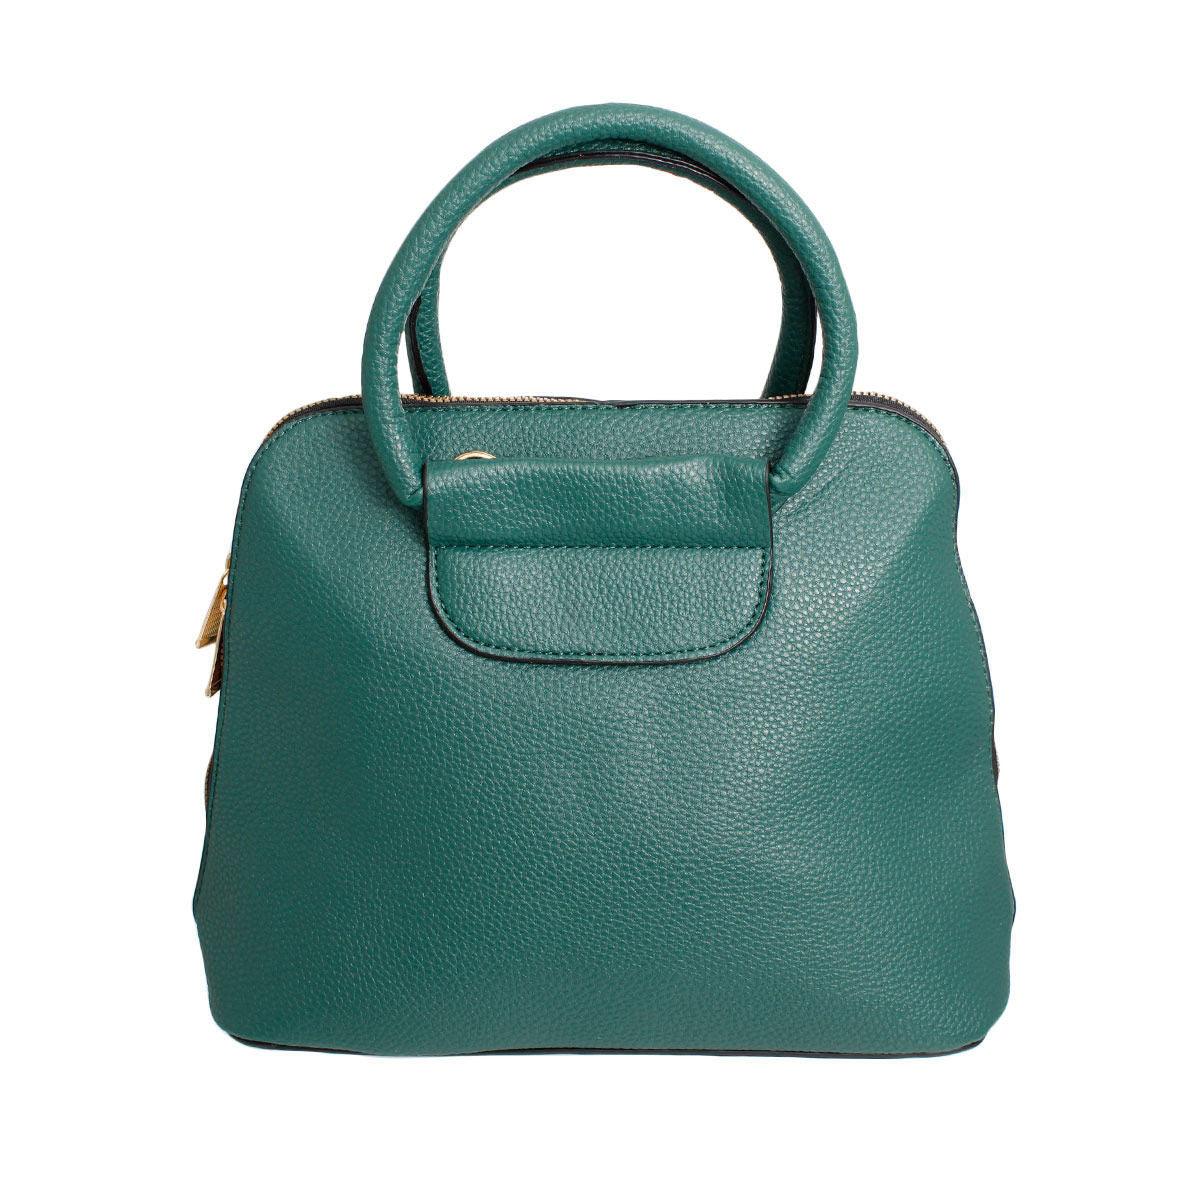 Must-Have Accessory: Chic Women's Green Handbag Ensemble Coveted Classic